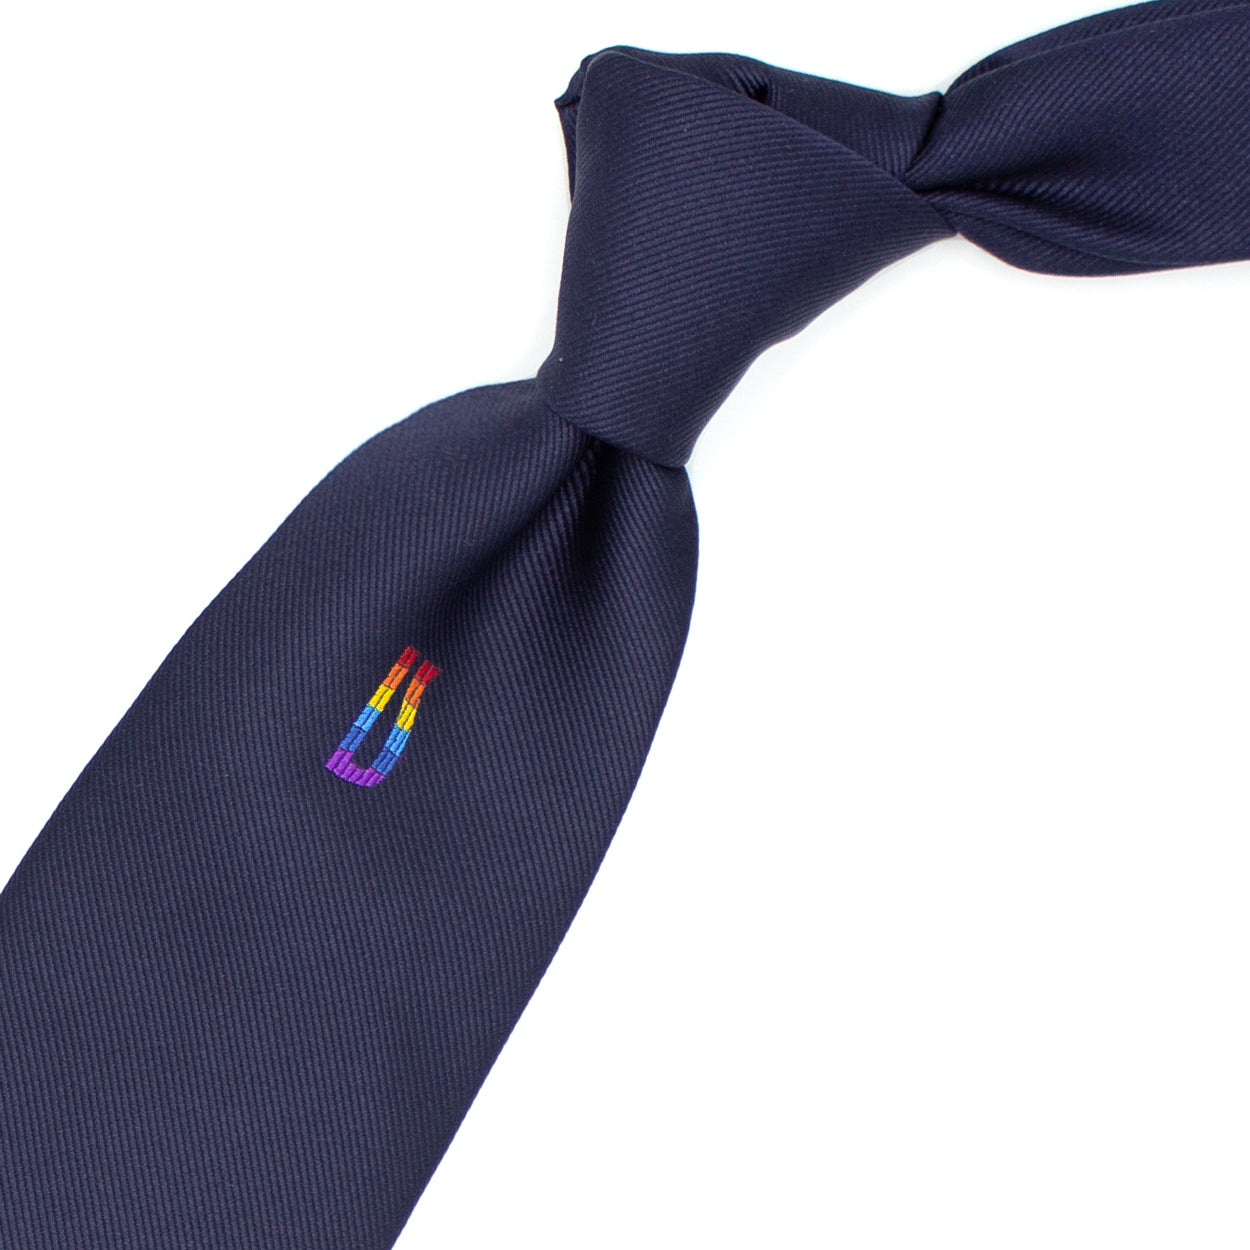 Blue tie with rainbow Ulturale monogram on the sub-knot